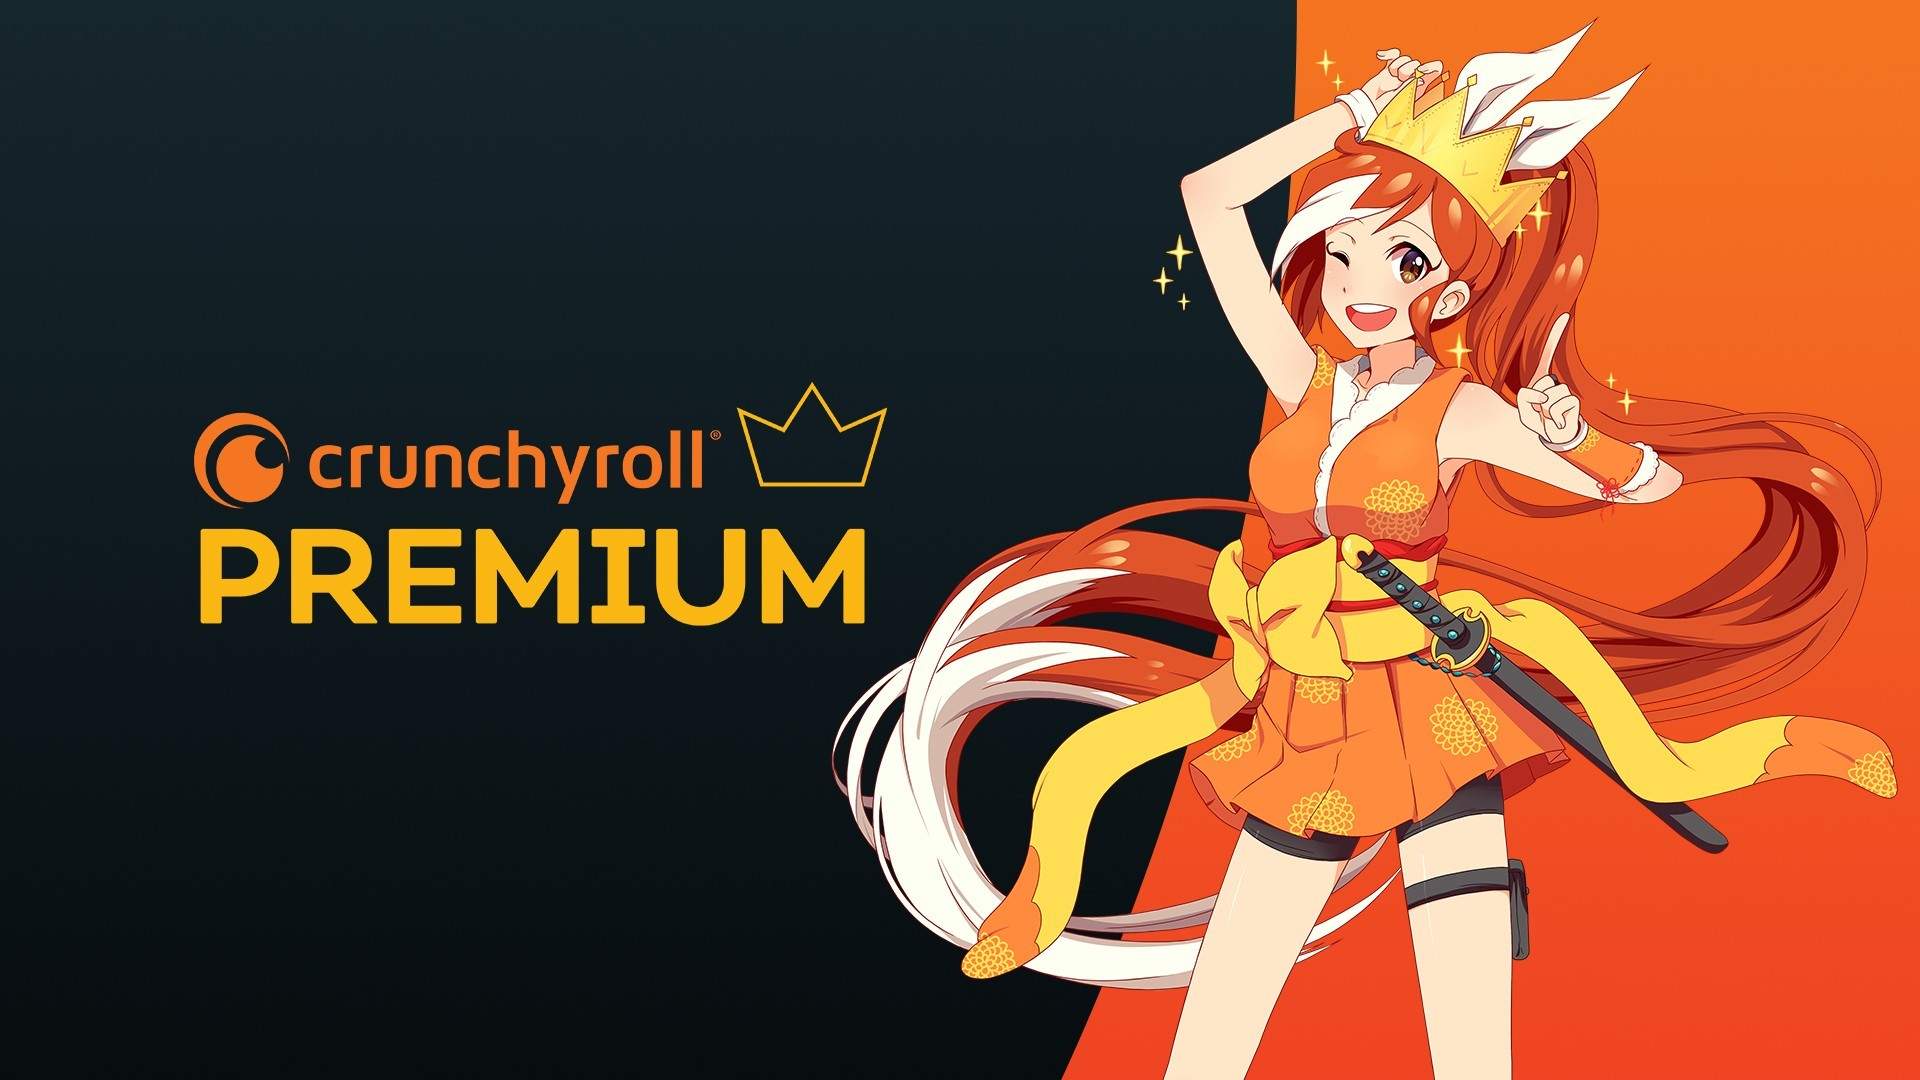 Game Pass Subscribers are Getting a Crunchyroll Trial